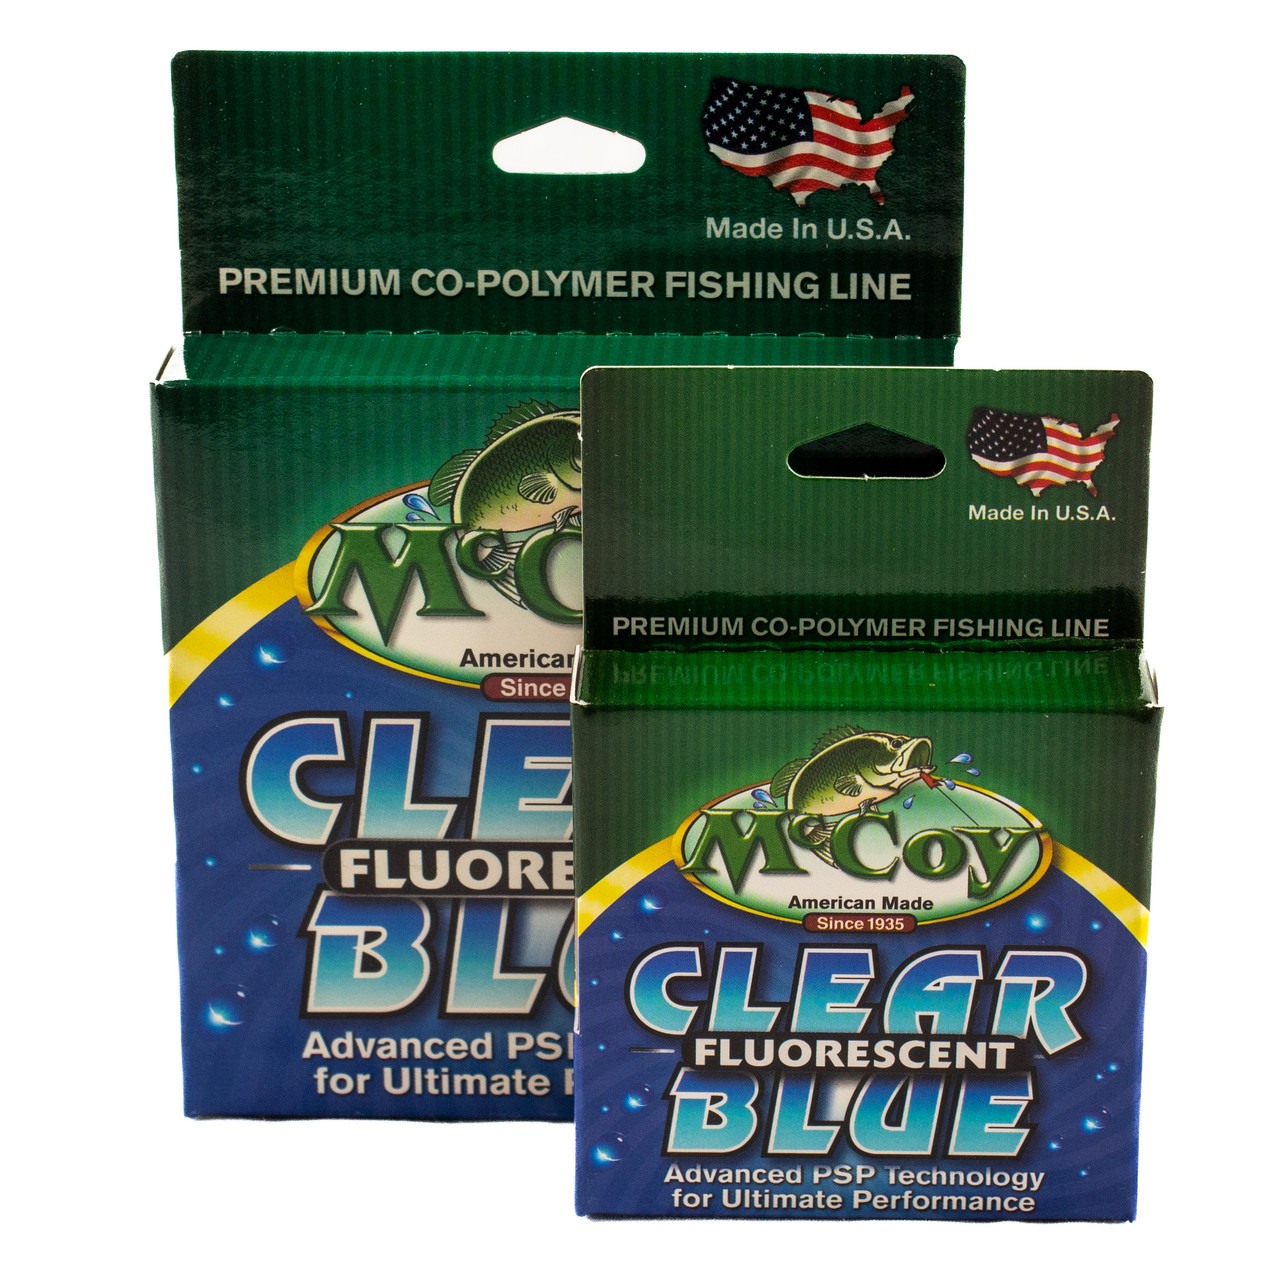 Mccoy Clear Blue Fluorescent Co-Polymer - Modern Outdoor Tackle